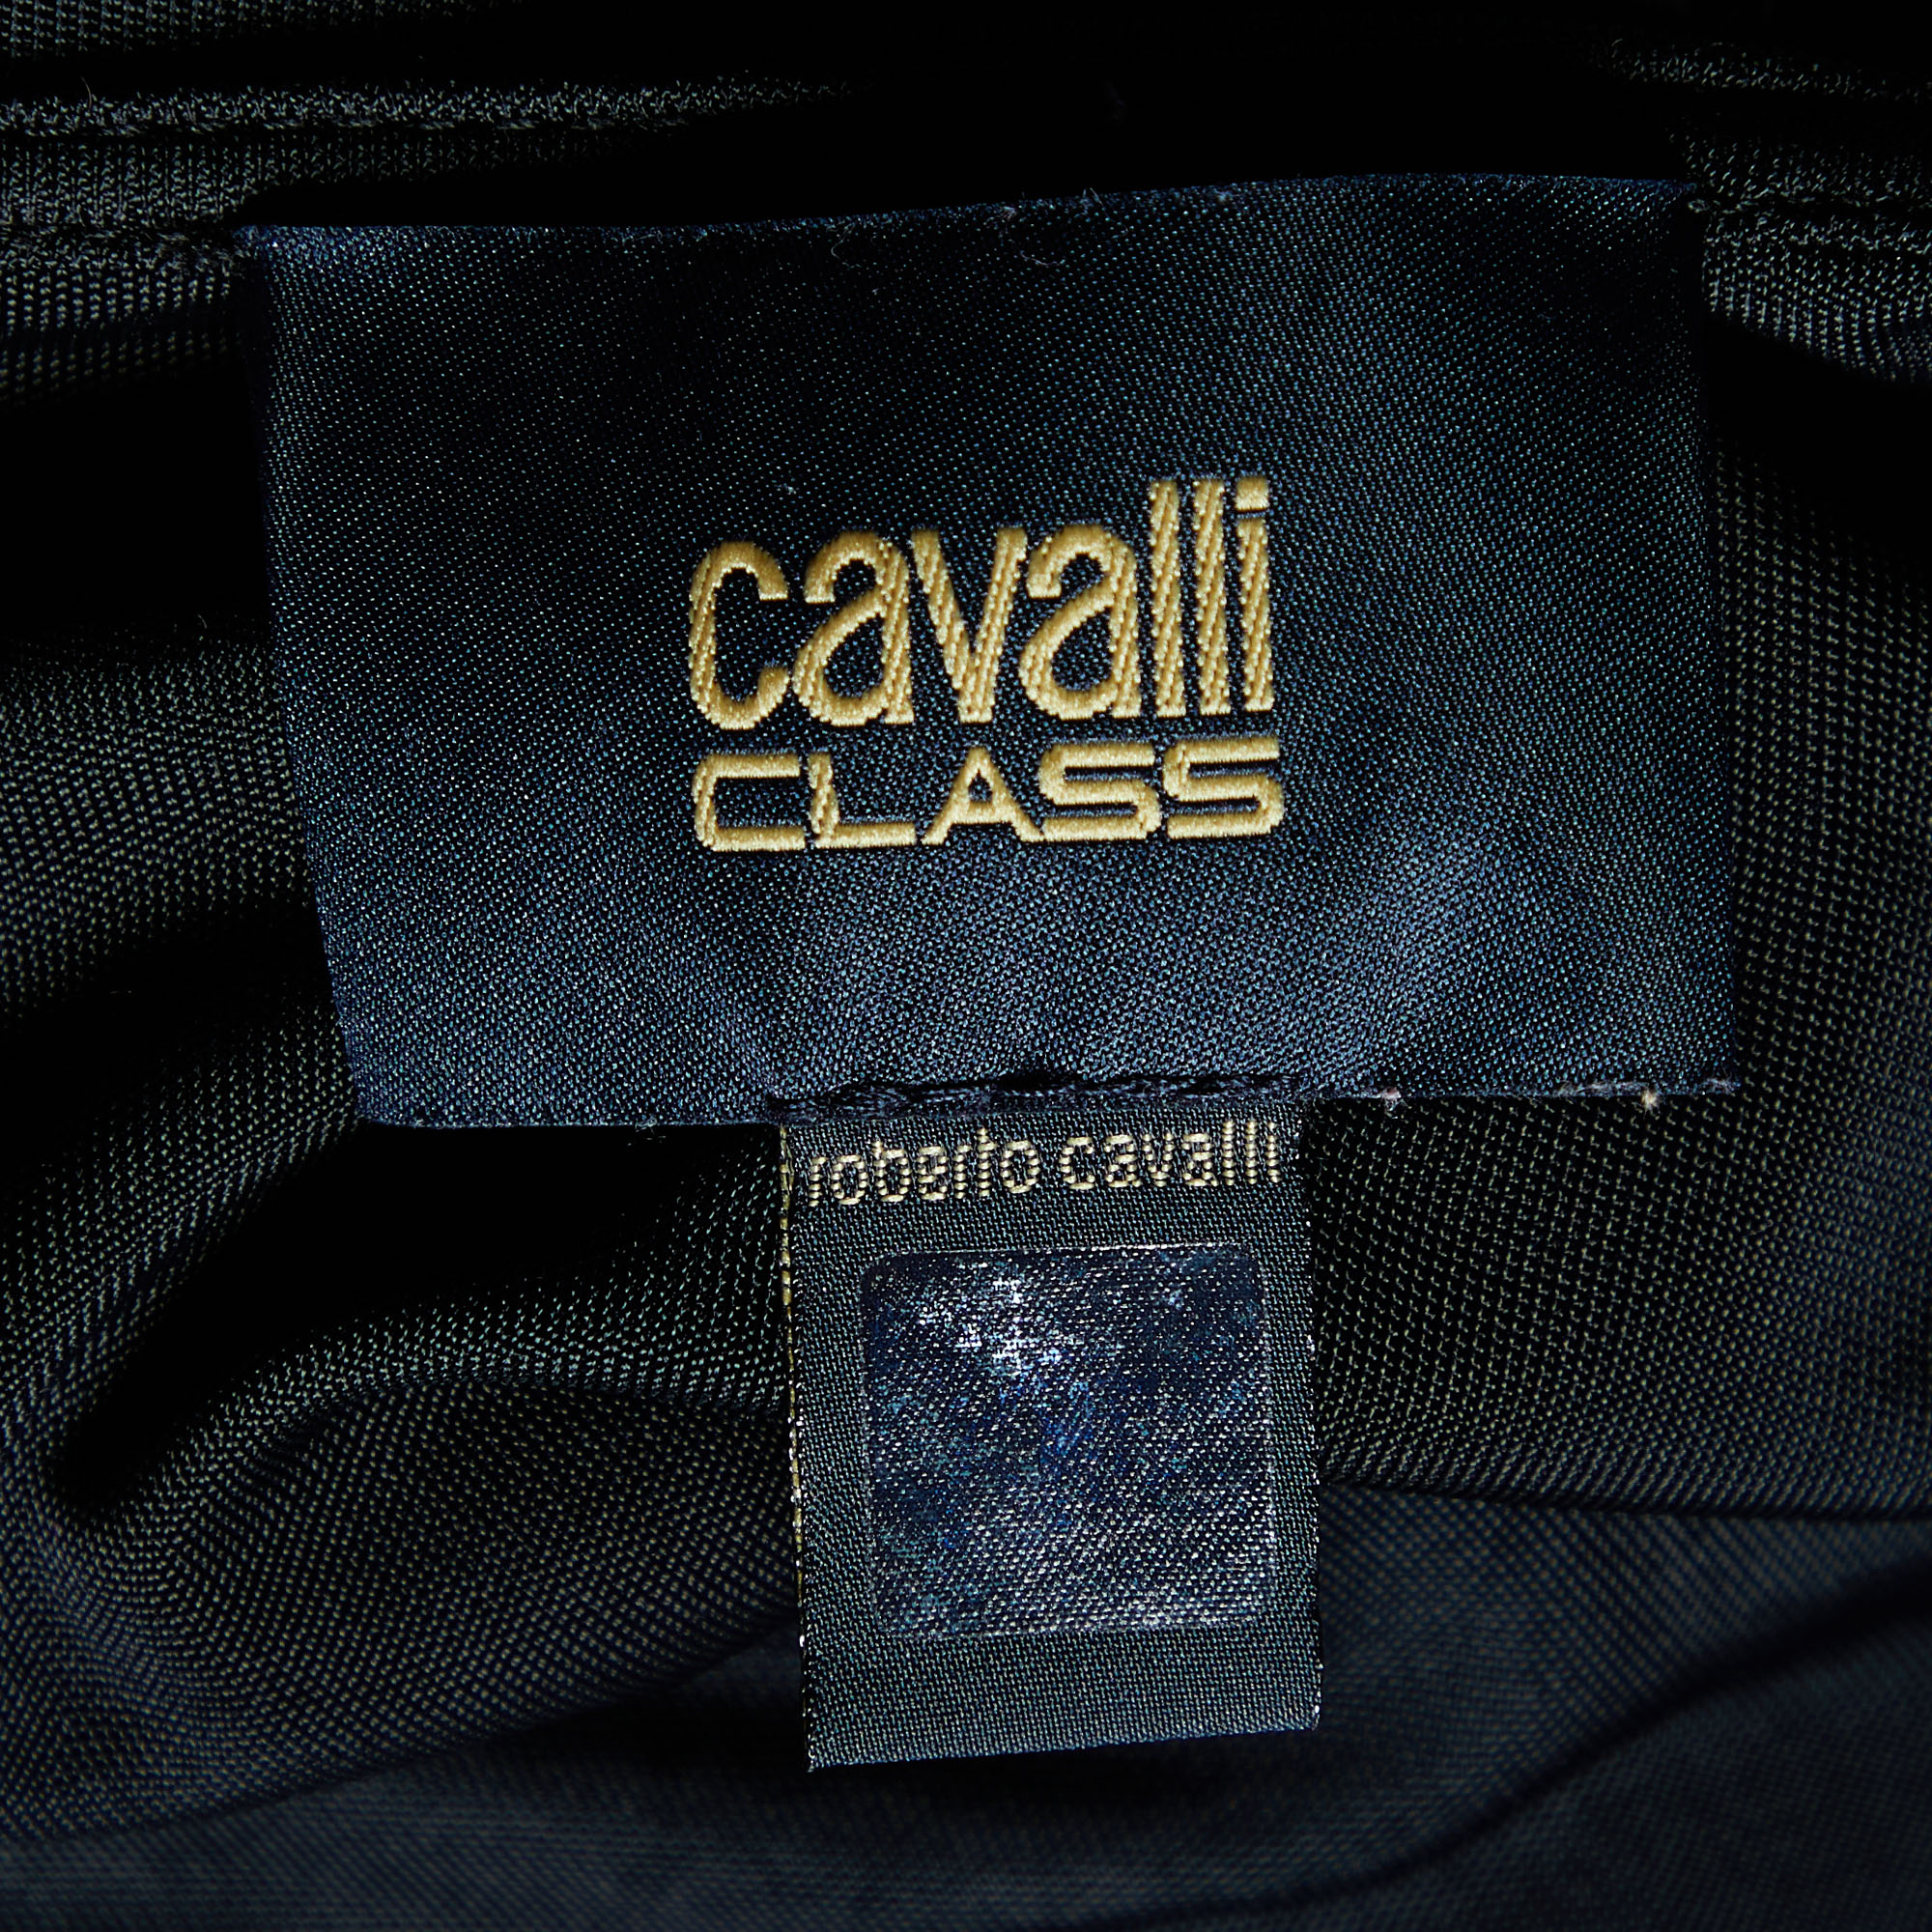 Cavalli Class Black Printed Jersey Relaxed Fit T-Shirt M